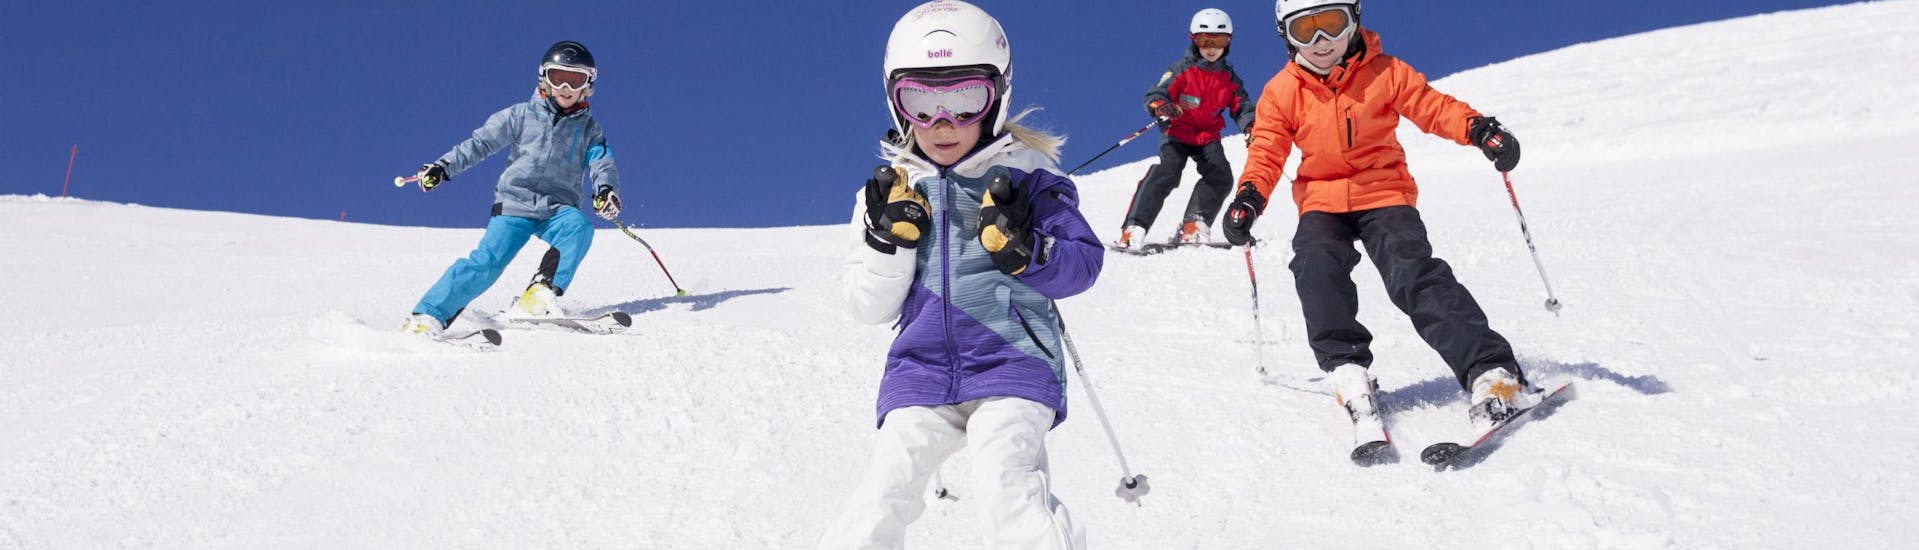 A group of children is enjoying their Kids Ski Lessons (6-12 years) - Full Day - All Levels with the ski school Skischule Zugspitze Grainau in the ski resort of Garmisch-Classic.